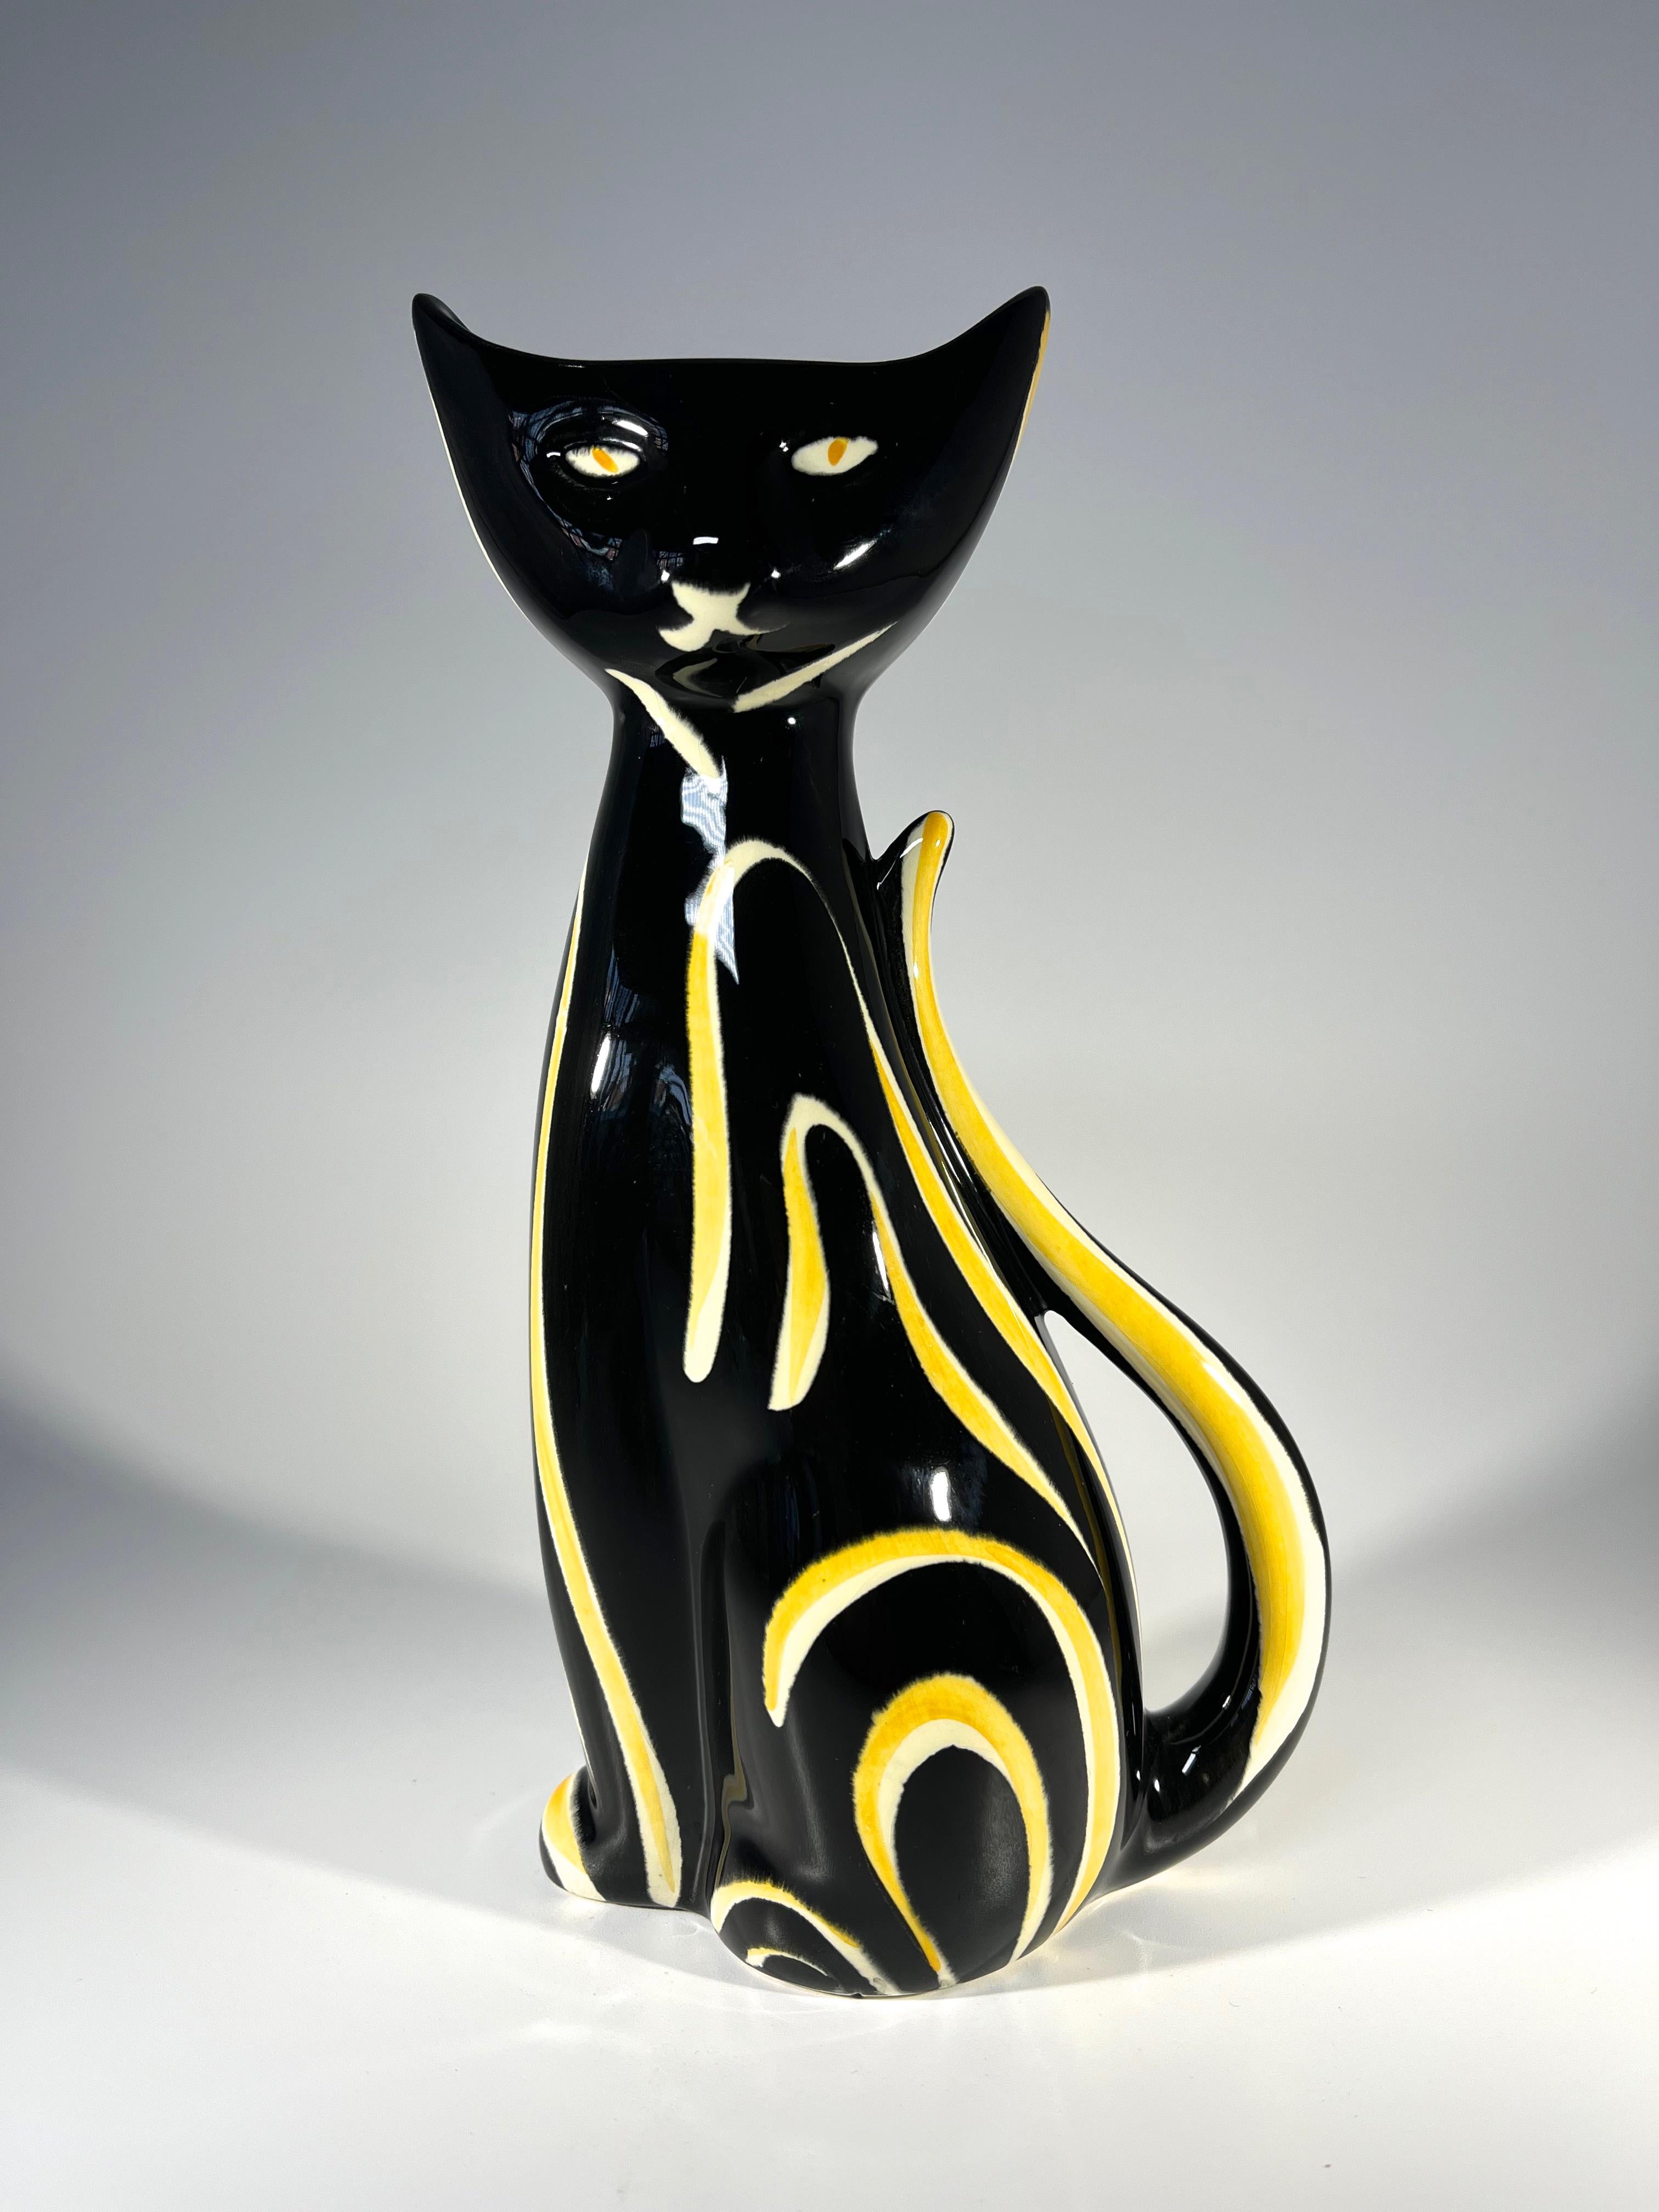 Striking black and yellow Tigris cat vase designed by Anneleise Beckh for West German company Schmider Keramik
Inscrutable expression on this strong design piece of retro
Circa 1950's
Numbered 4310 to base
Height 8.5 inch, Width 4 inch, Depth 2.75